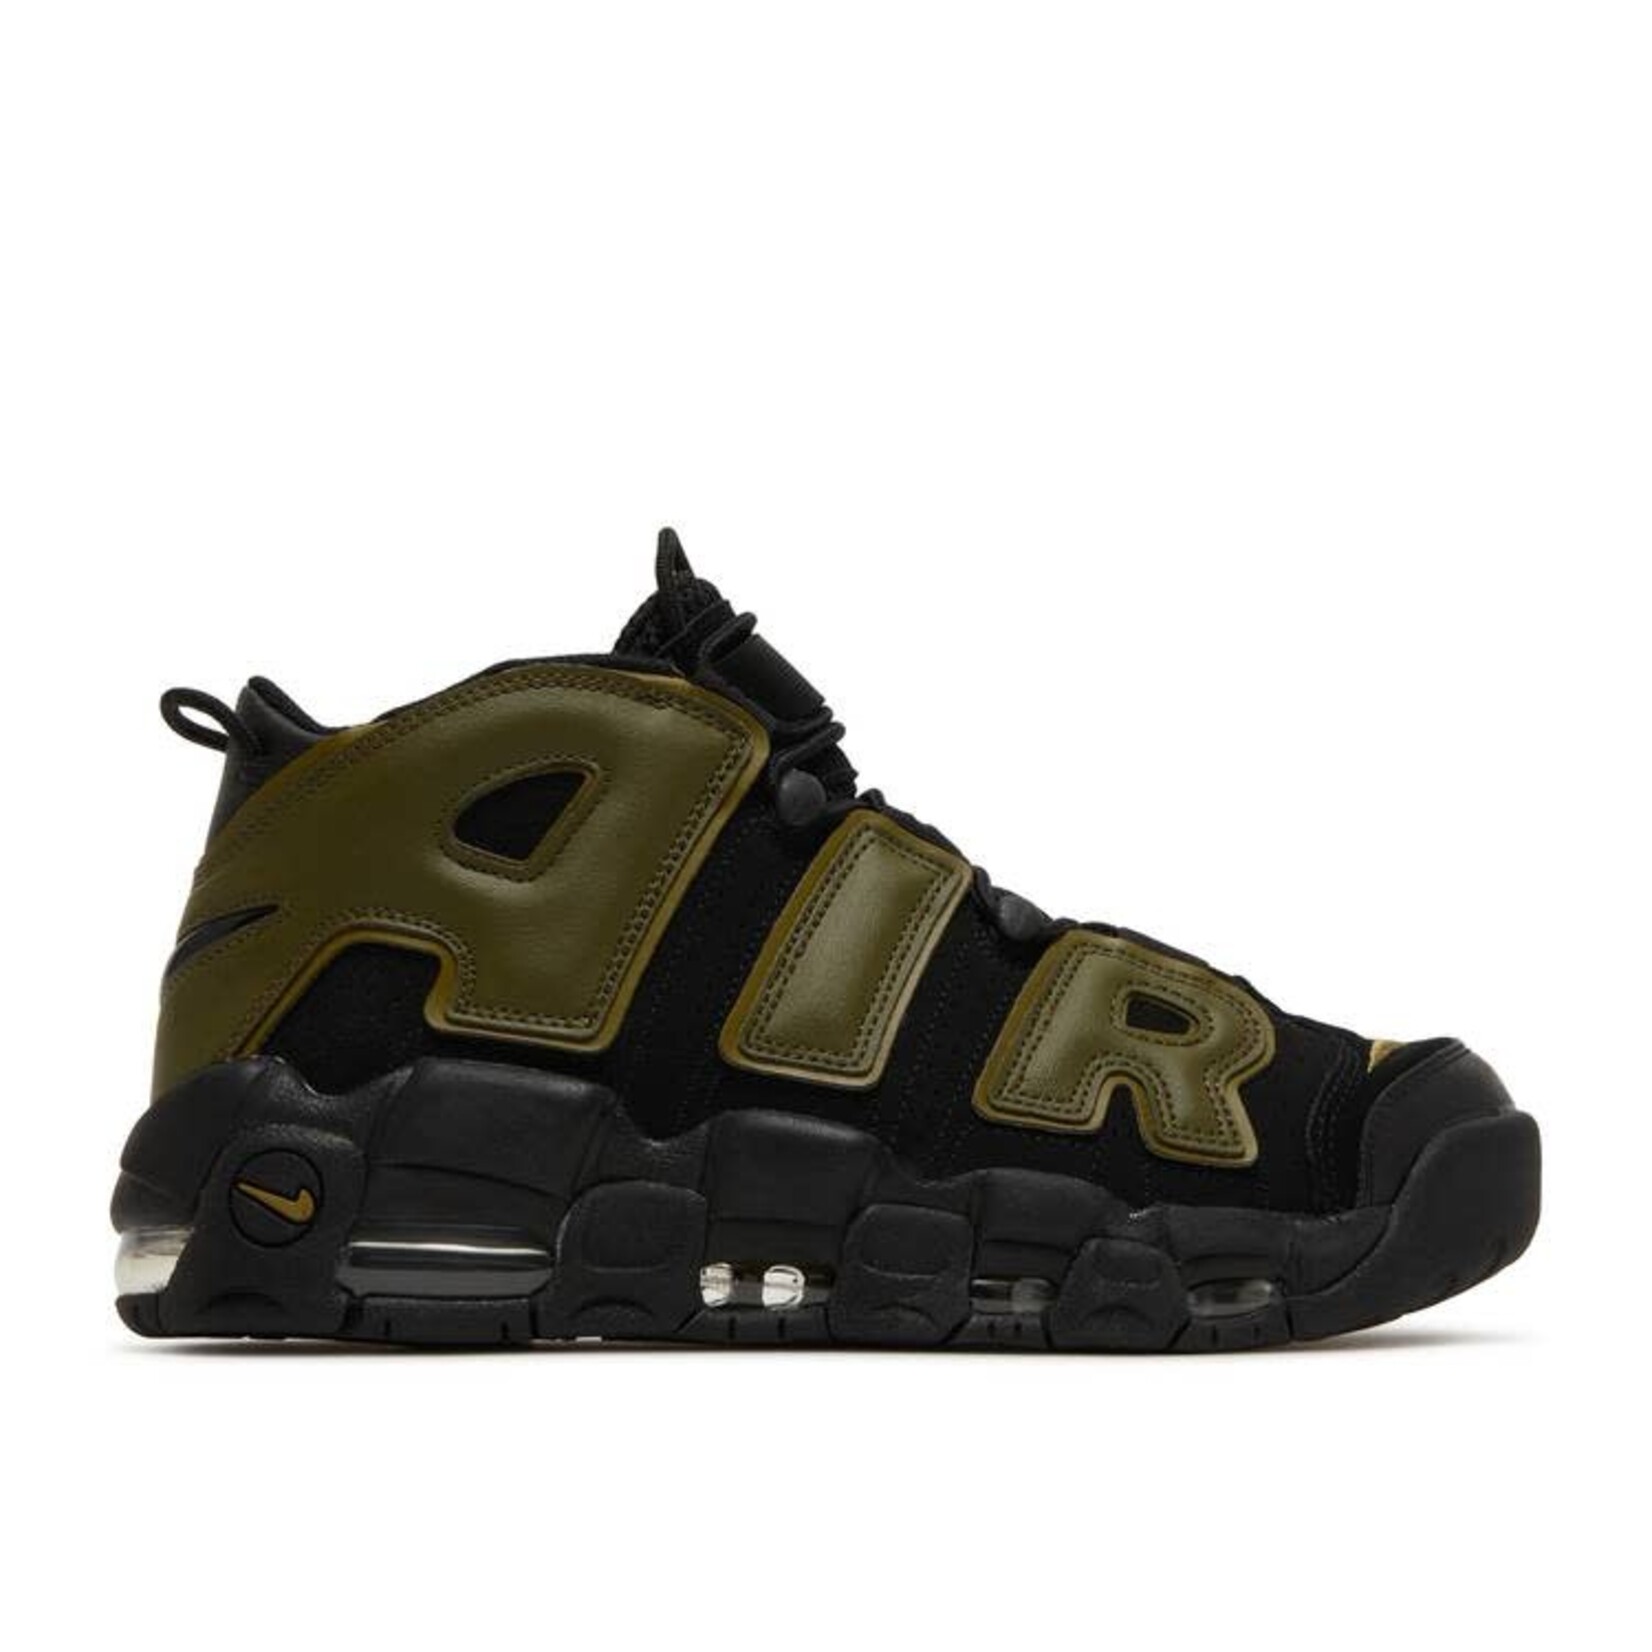 Nike Nike Air More Uptempo Rough Green Size 11.5, DS BRAND NEW